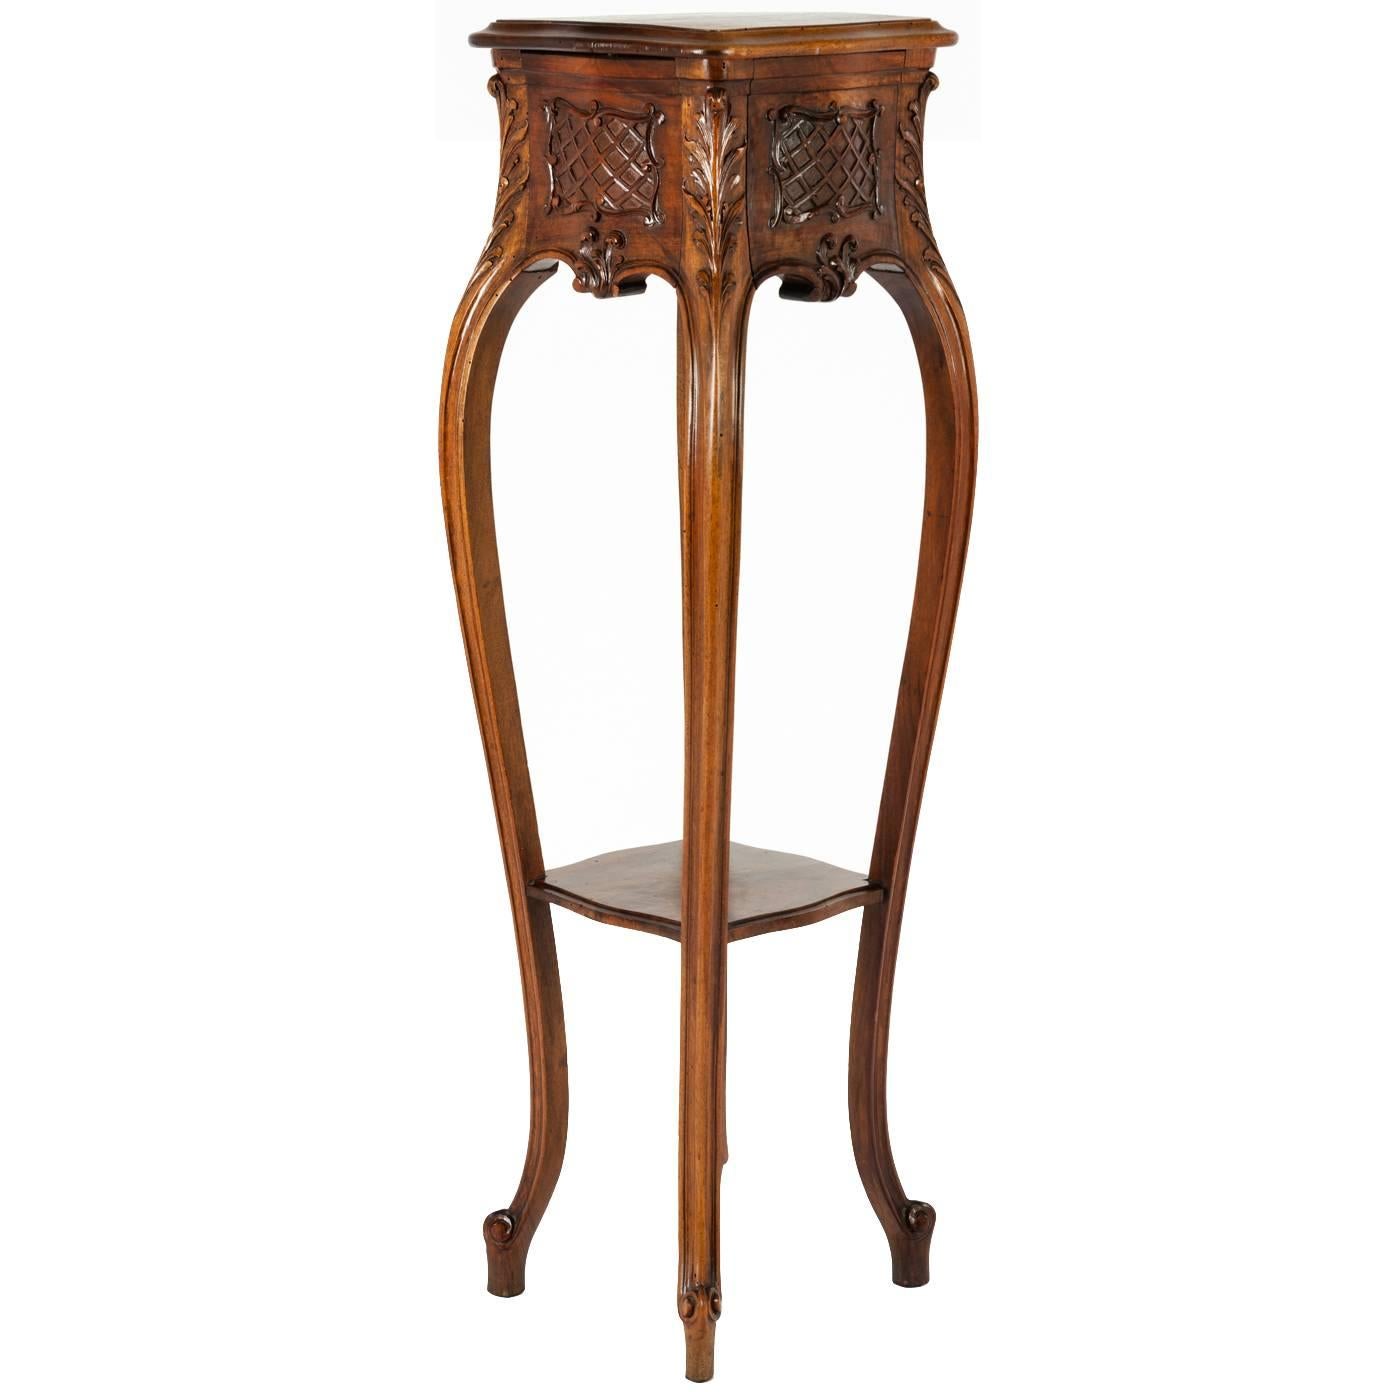 Antique Classic Hand-Carved Fern Stand / Pedestal